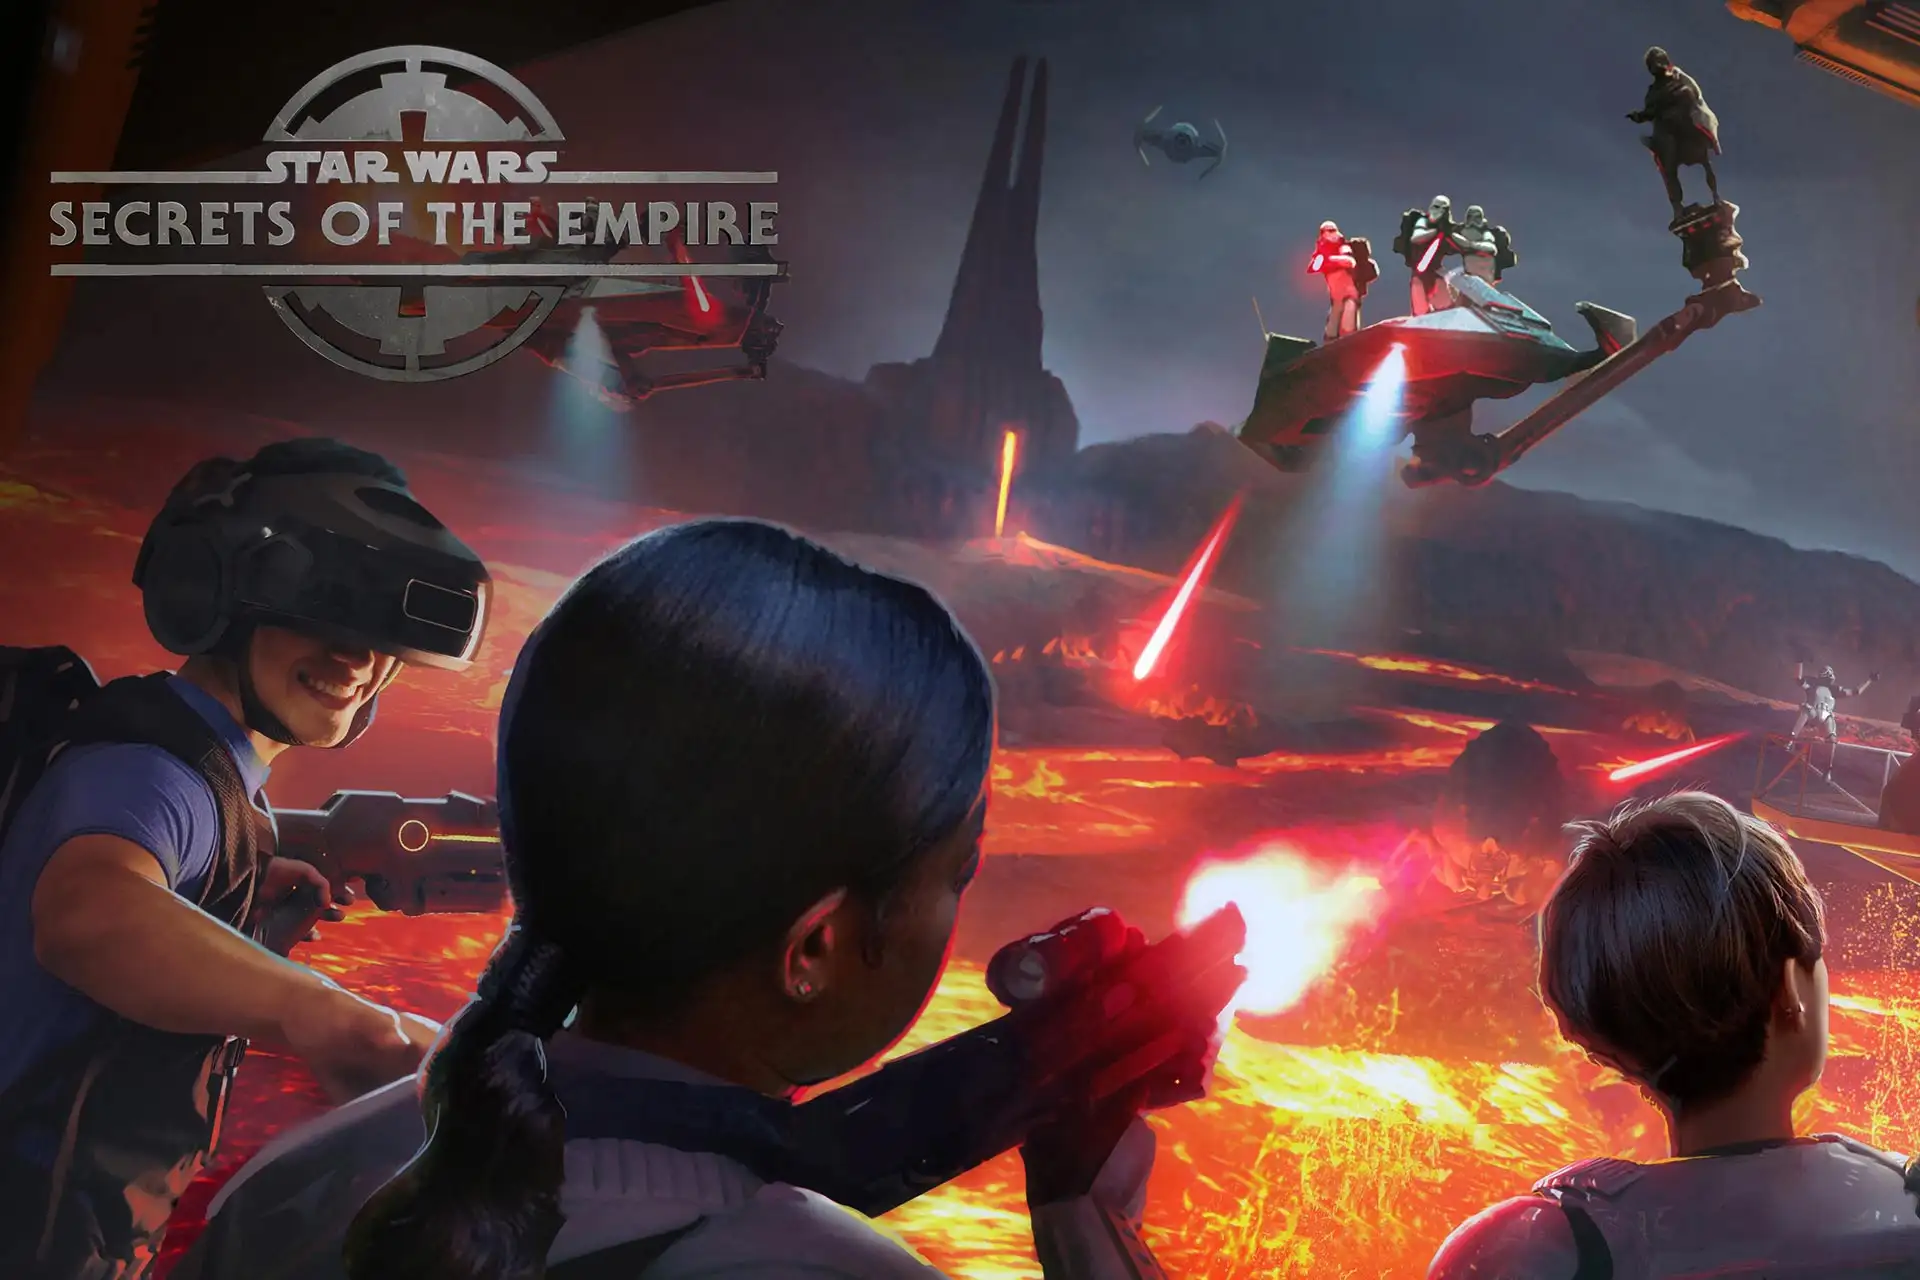 Star Wars: Secrets of the Empire Virtual Reality Experience at Disney Springs.